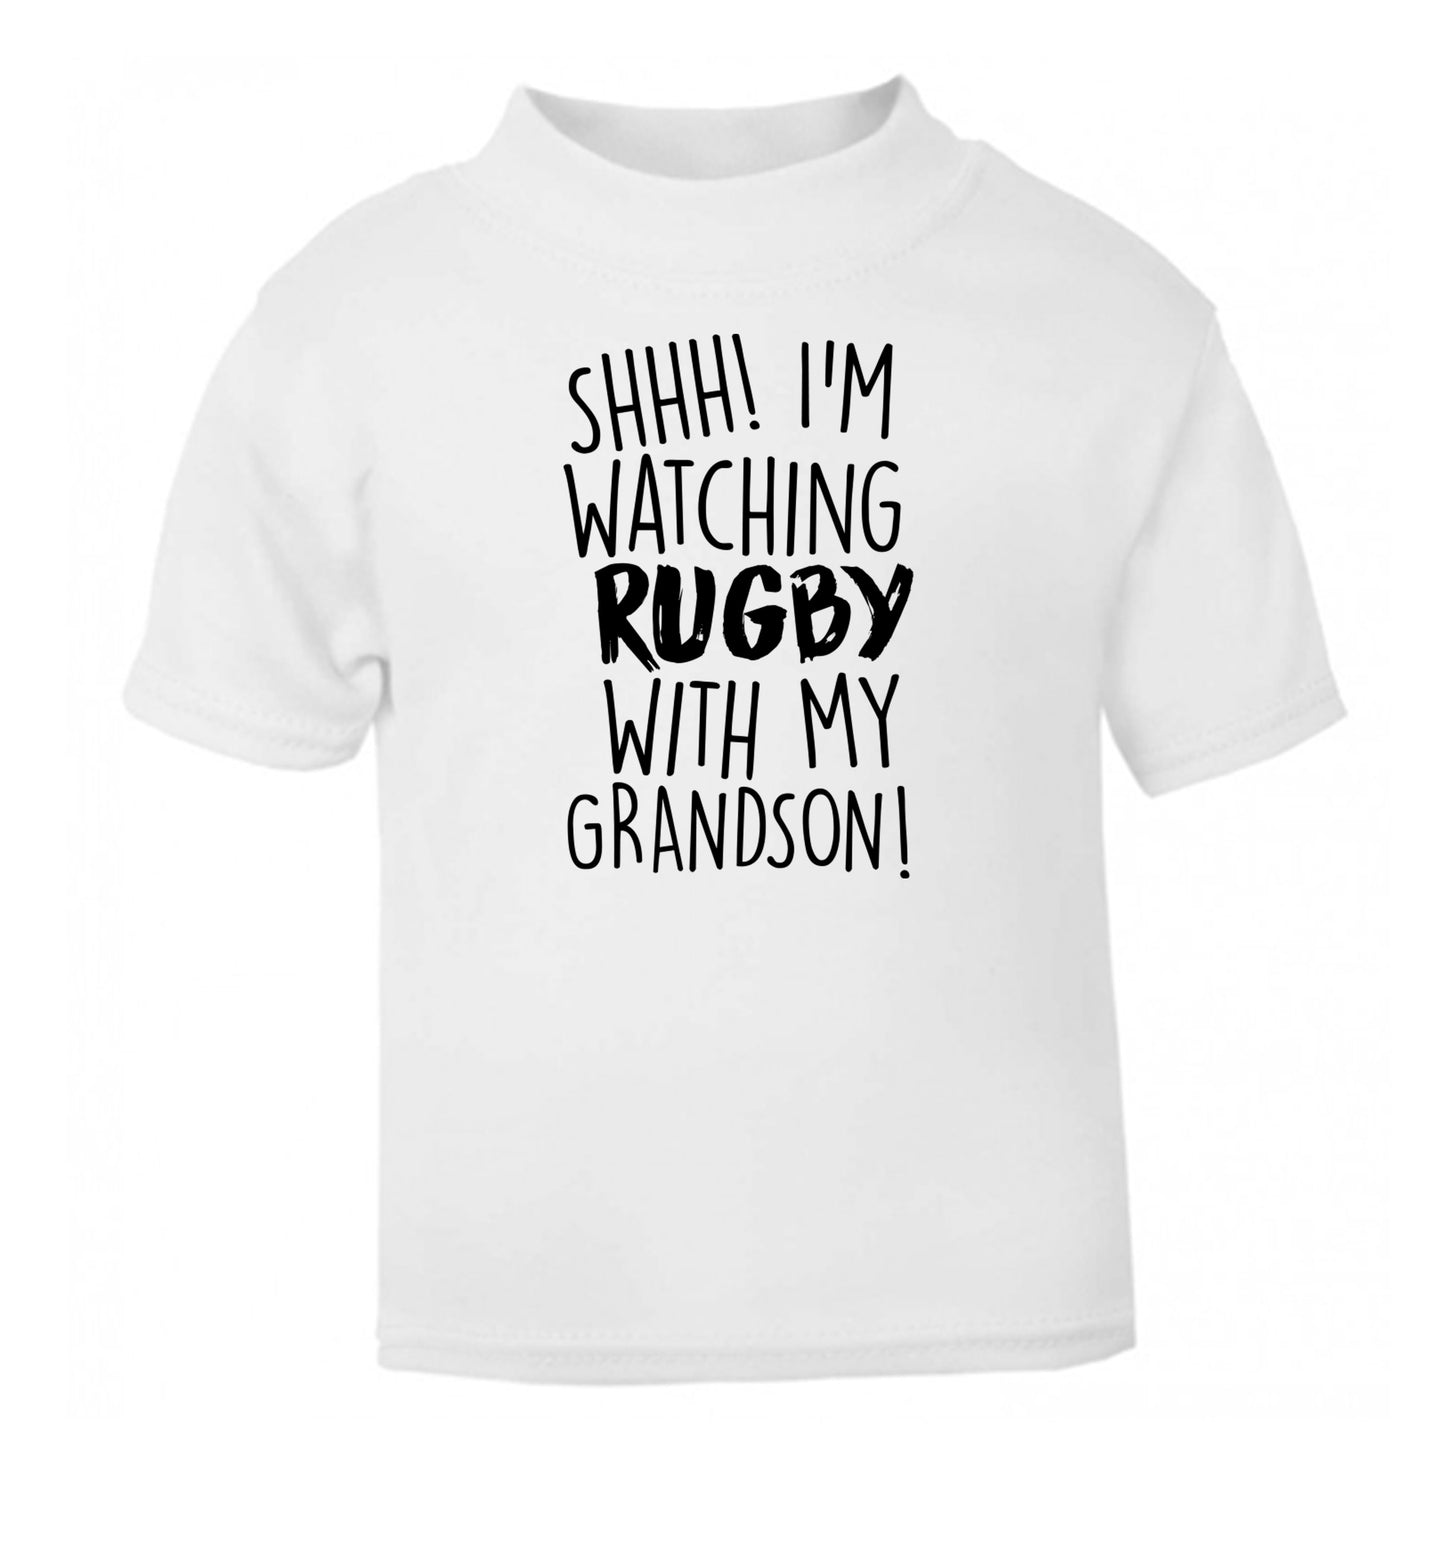 Shh I'm watching rugby with my grandson white Baby Toddler Tshirt 2 Years